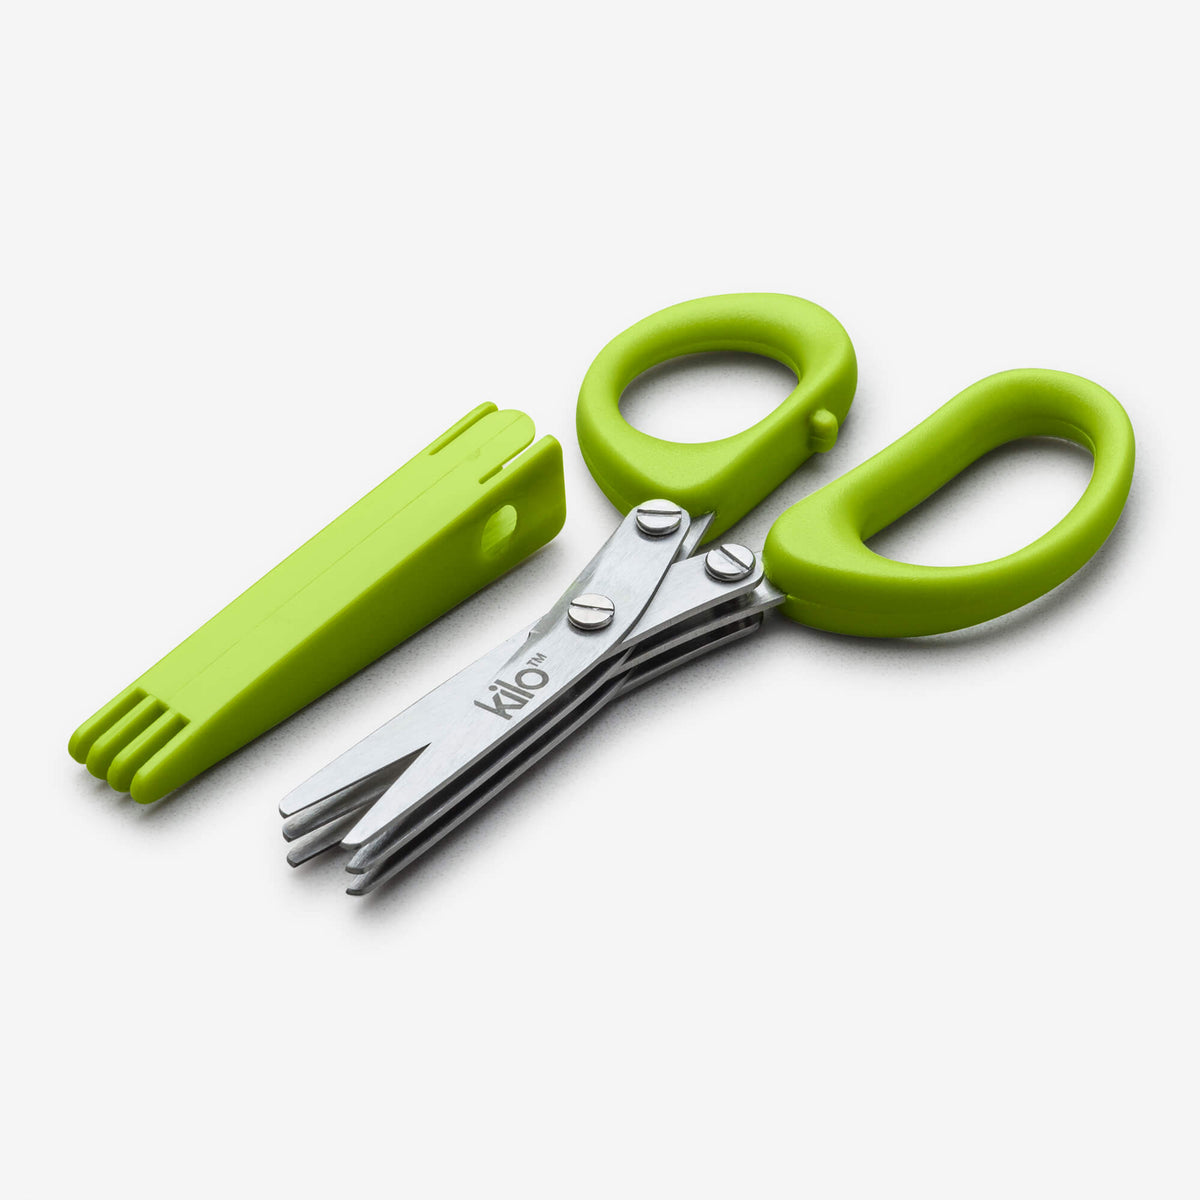 Handy Mini Herb Shears with Cover